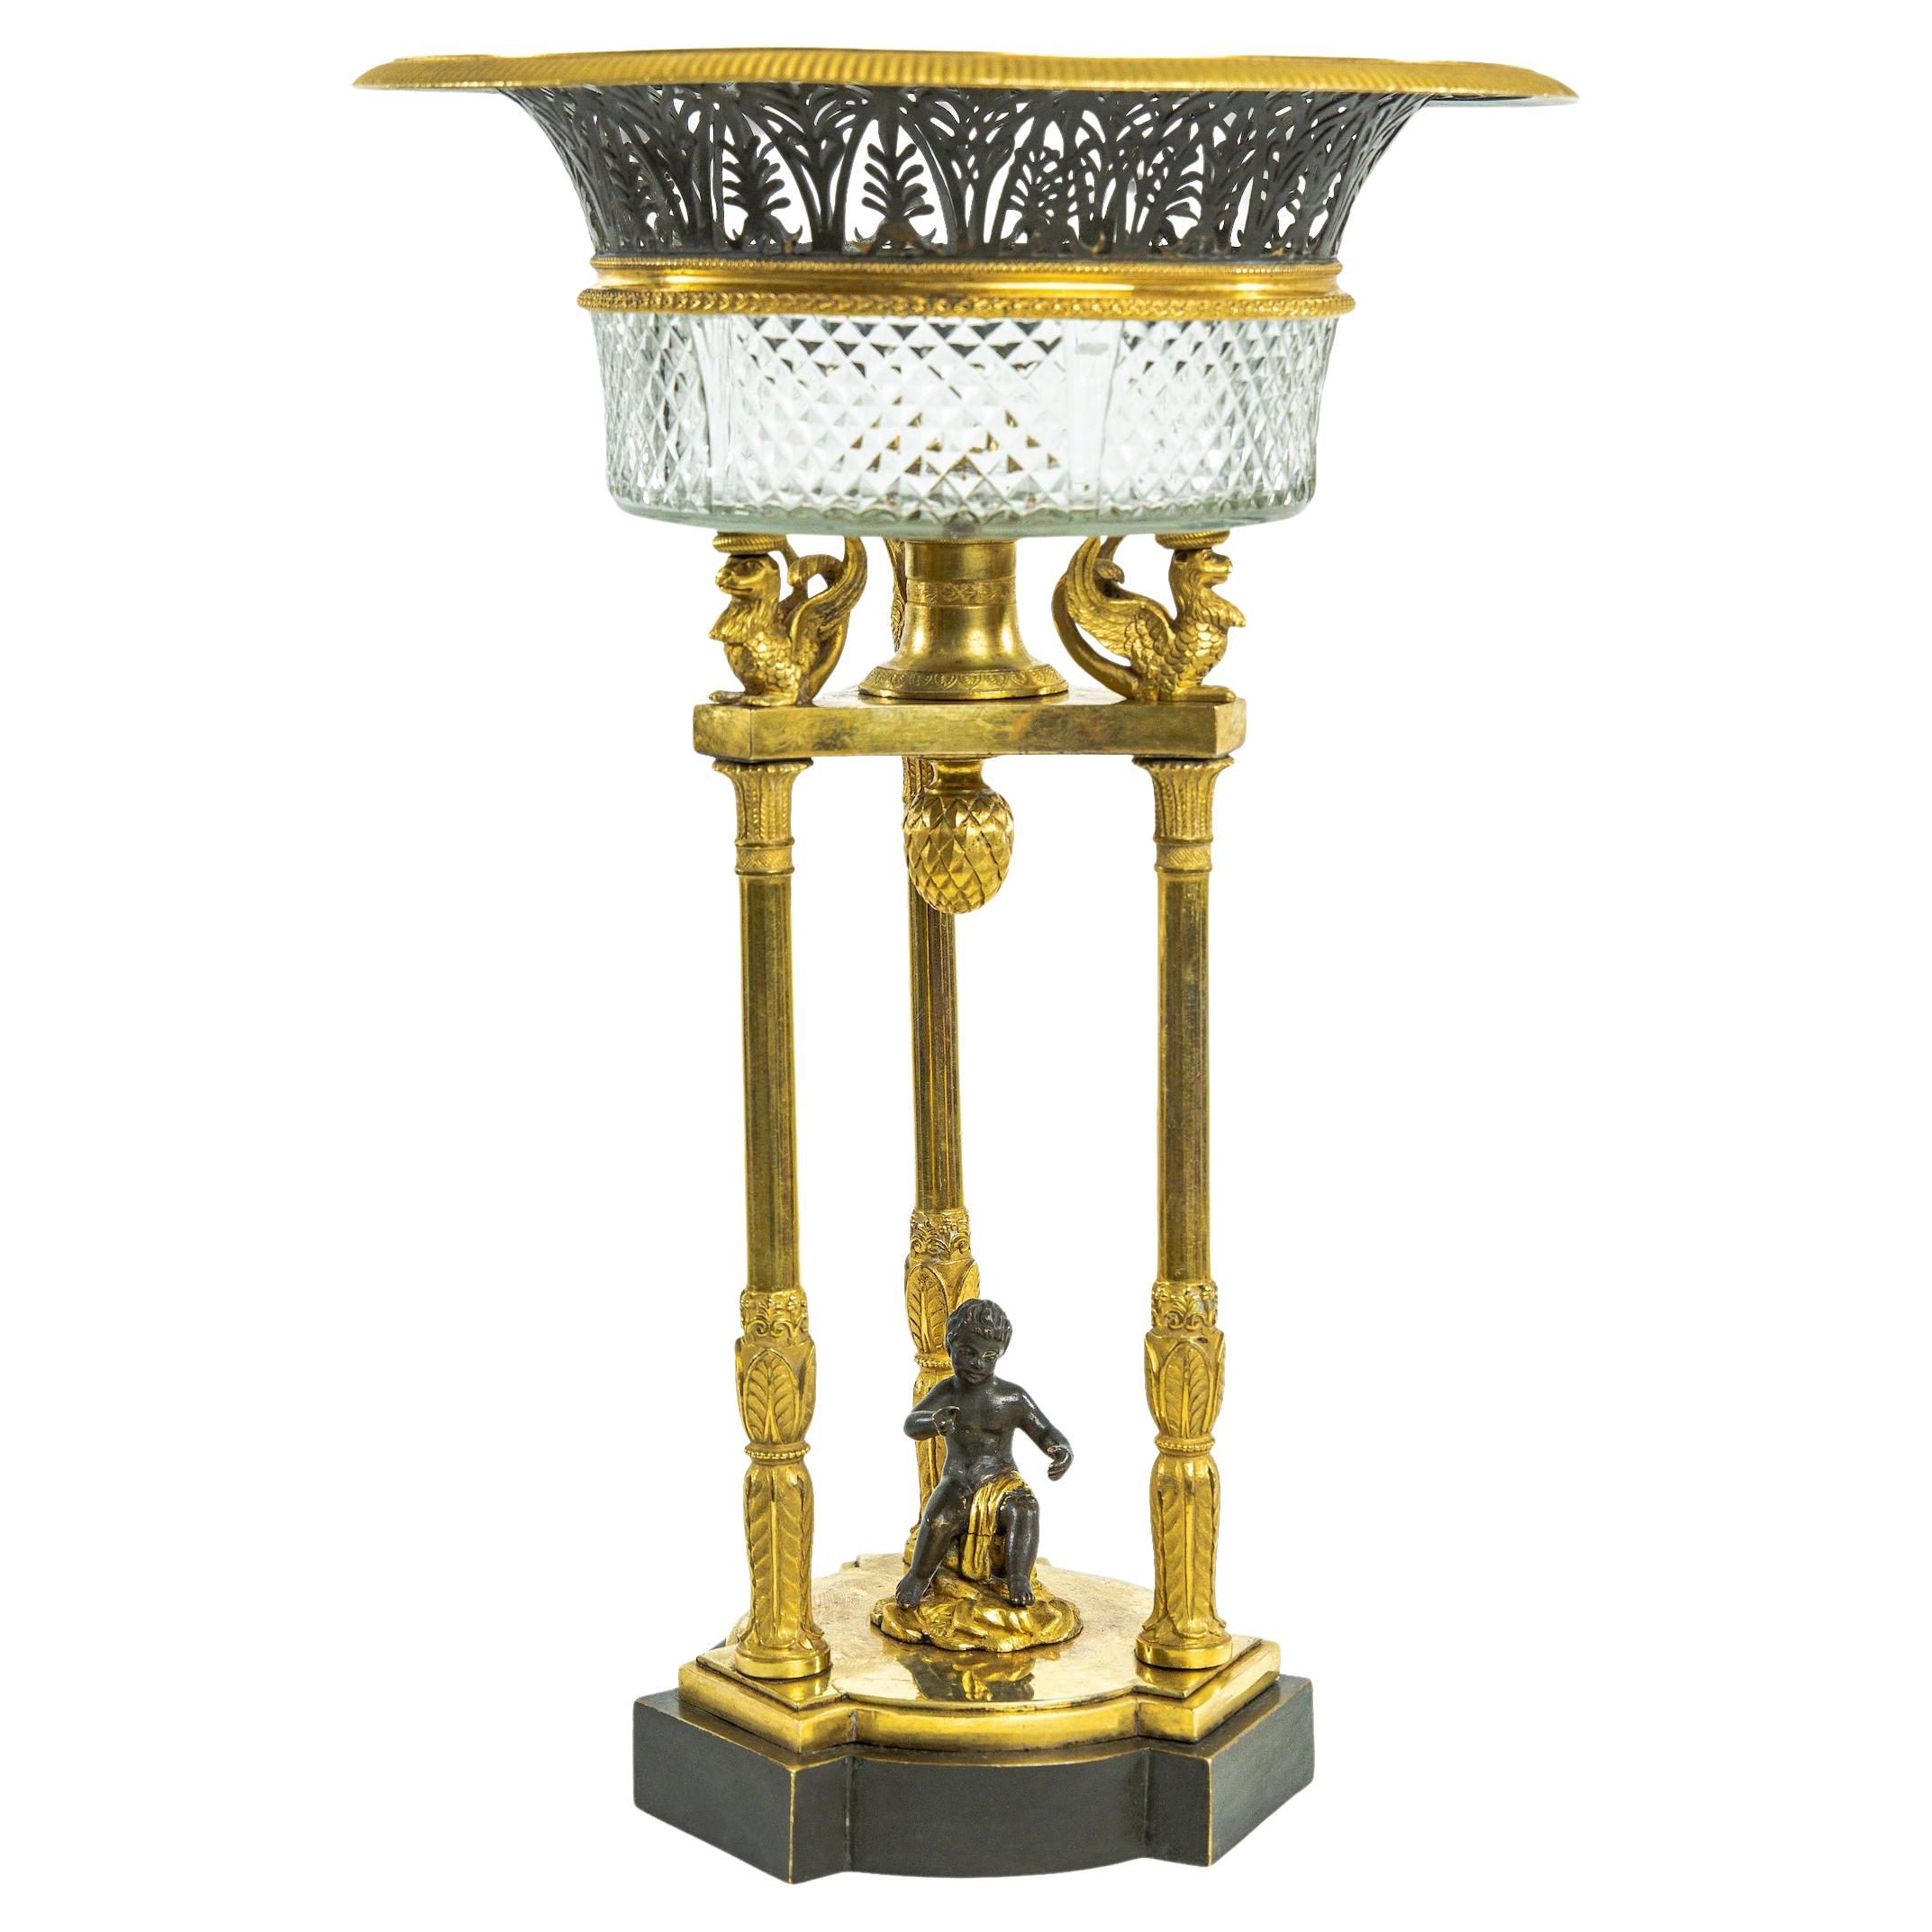 Empire Centerpiece with Putto Decor, Bronze and Glass, Early 19th Century